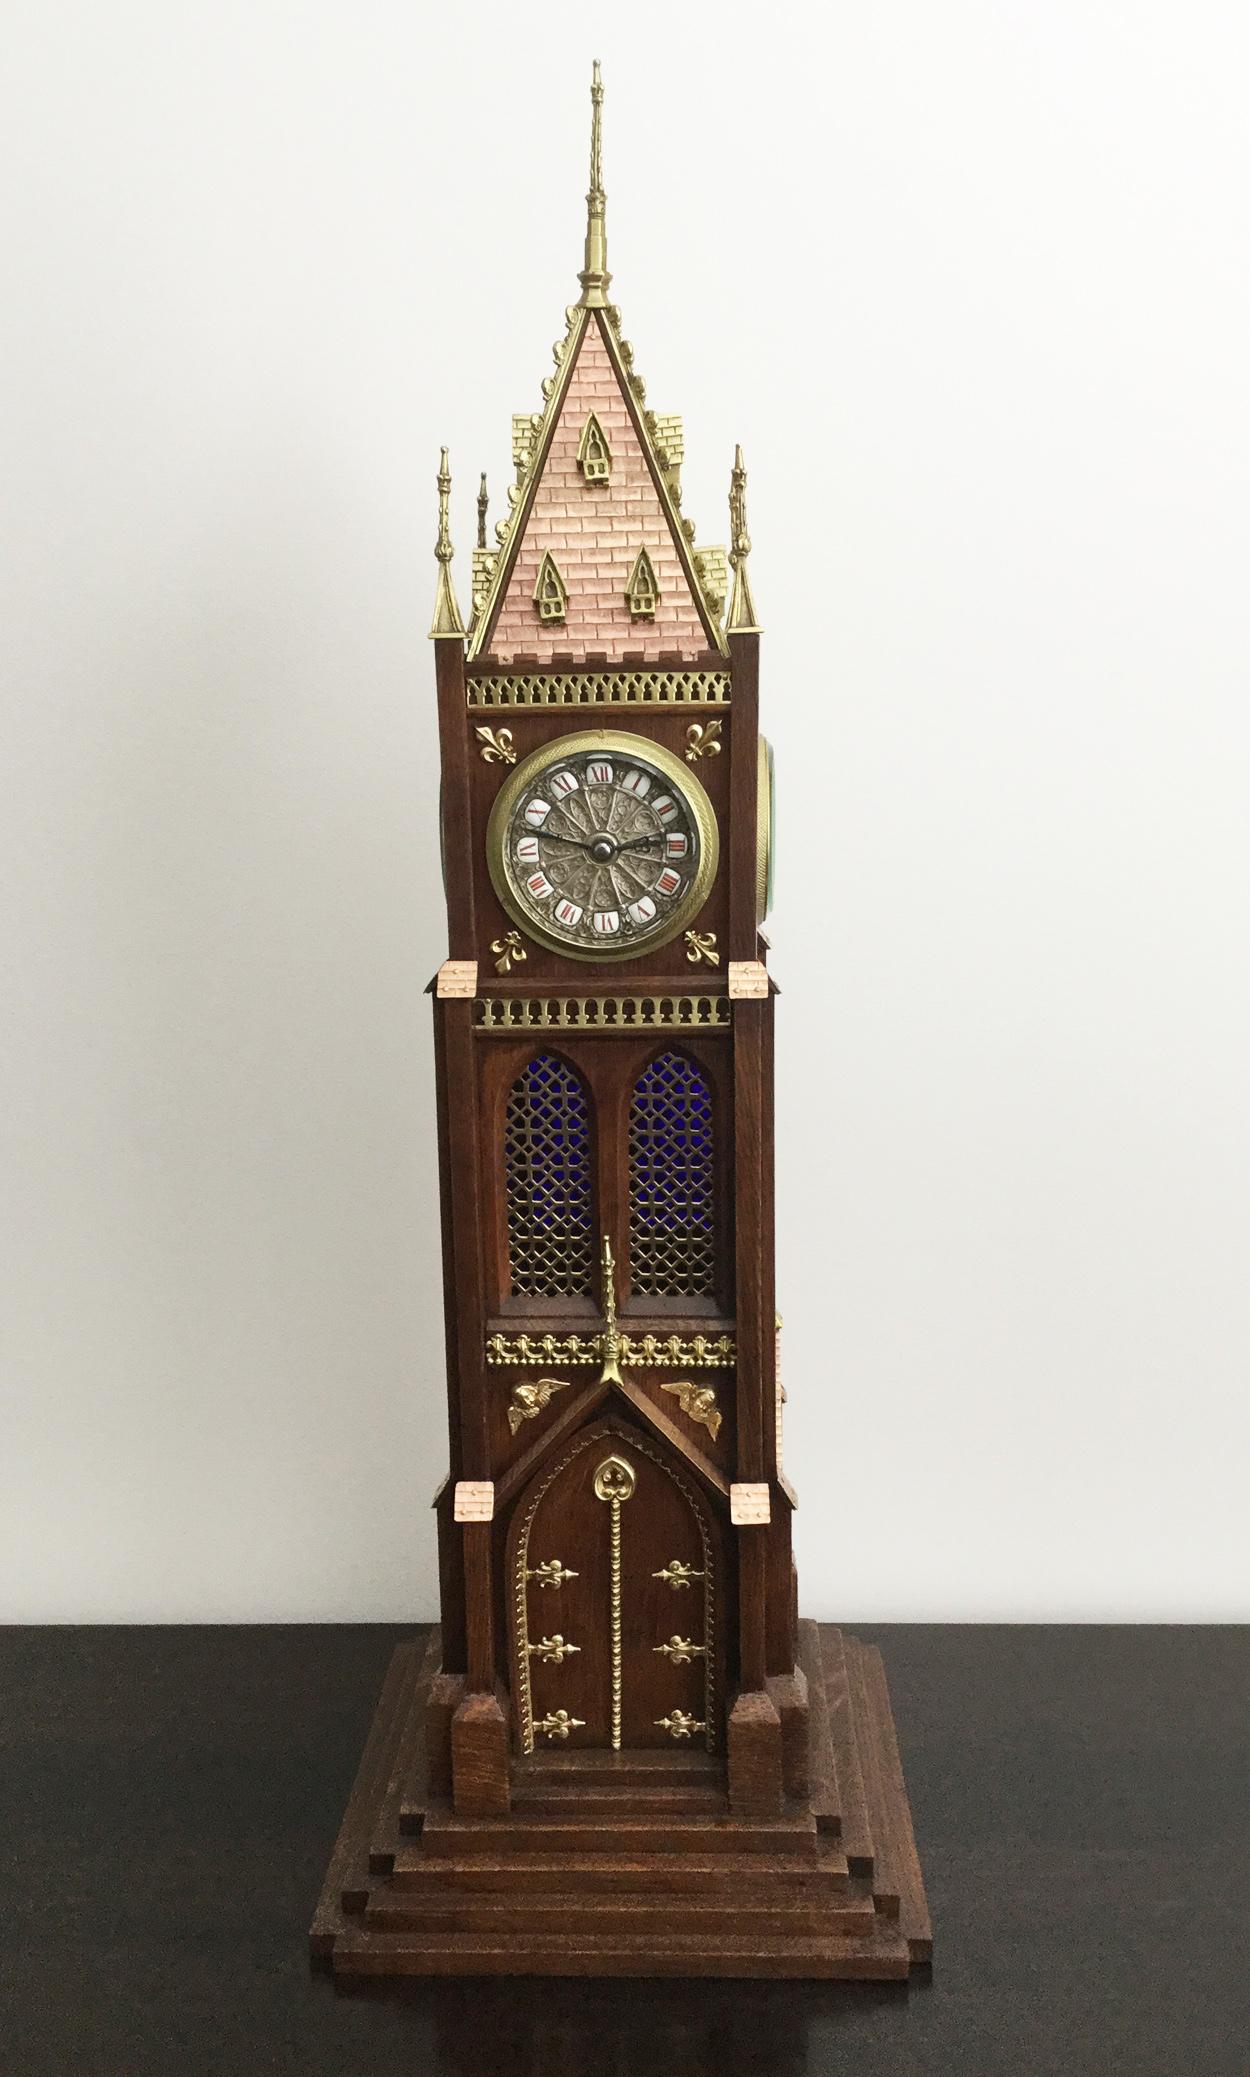 A magnificent large rare novelty Blumberg four face tower clock, circa 1880.

The walnut case topped with a copper roof and all-over brass detailing, the long tower windows backed by blue glass, the decorative silver faces with ceramic inserts